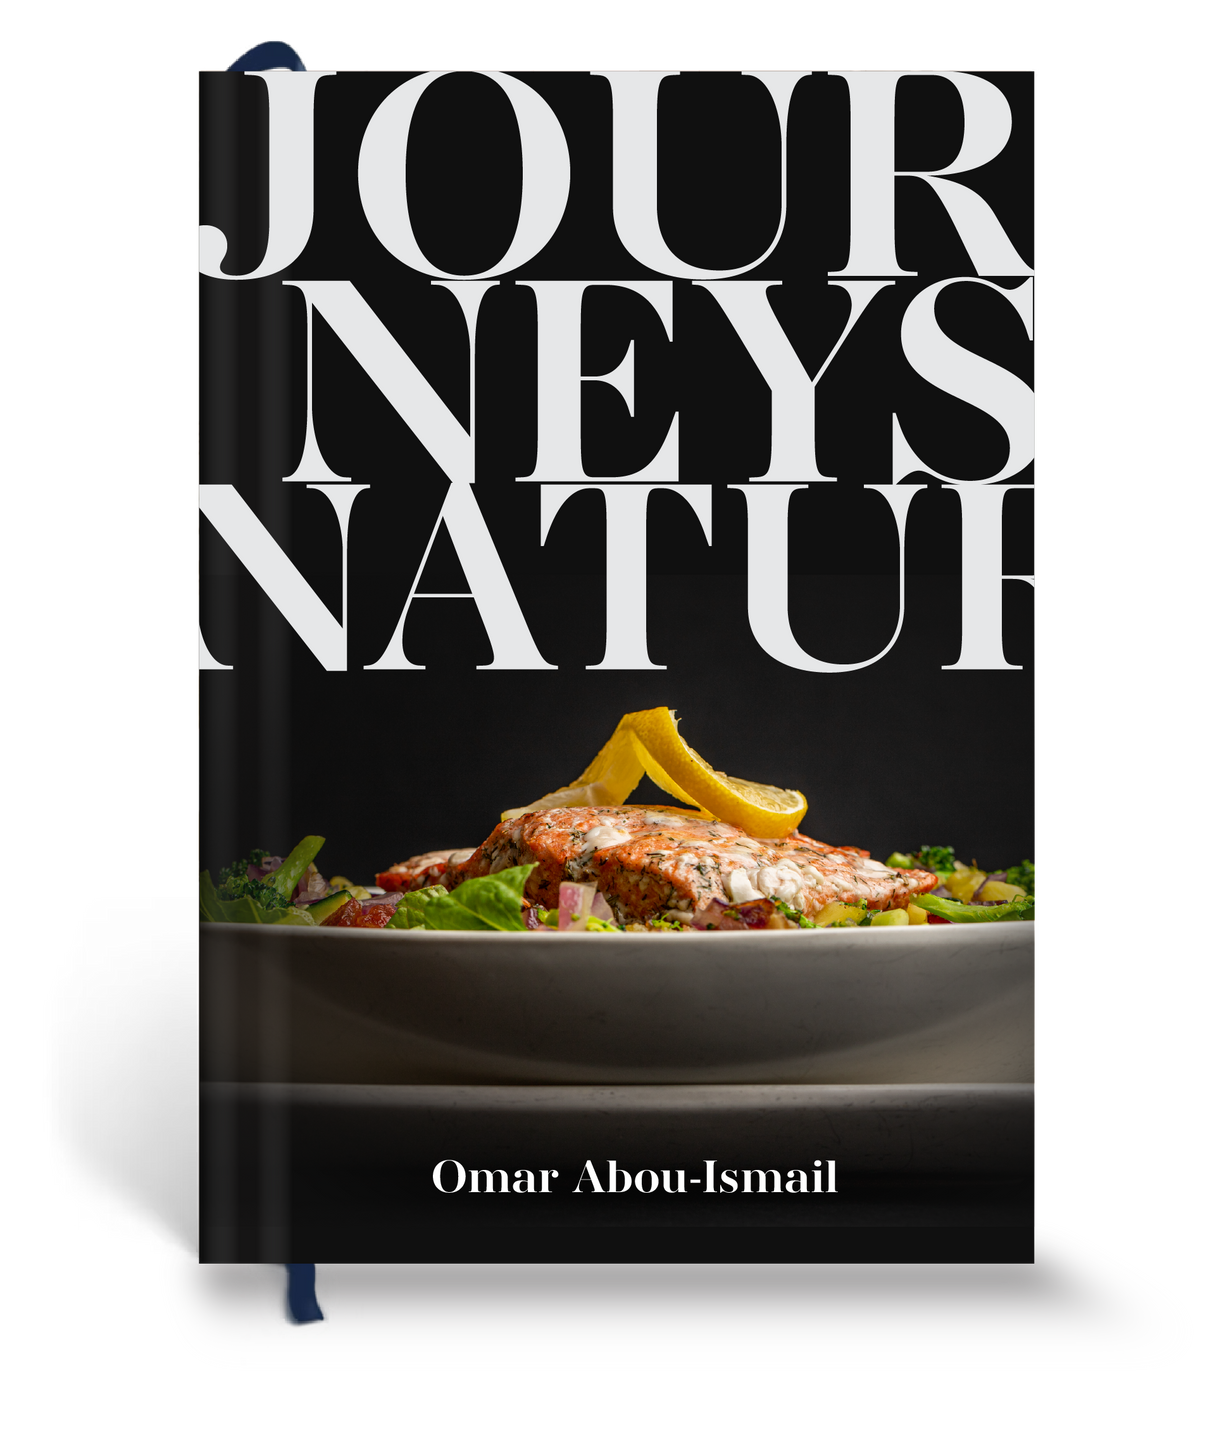 PRE-ORDER Omar Abou-Ismail's Cook Book!